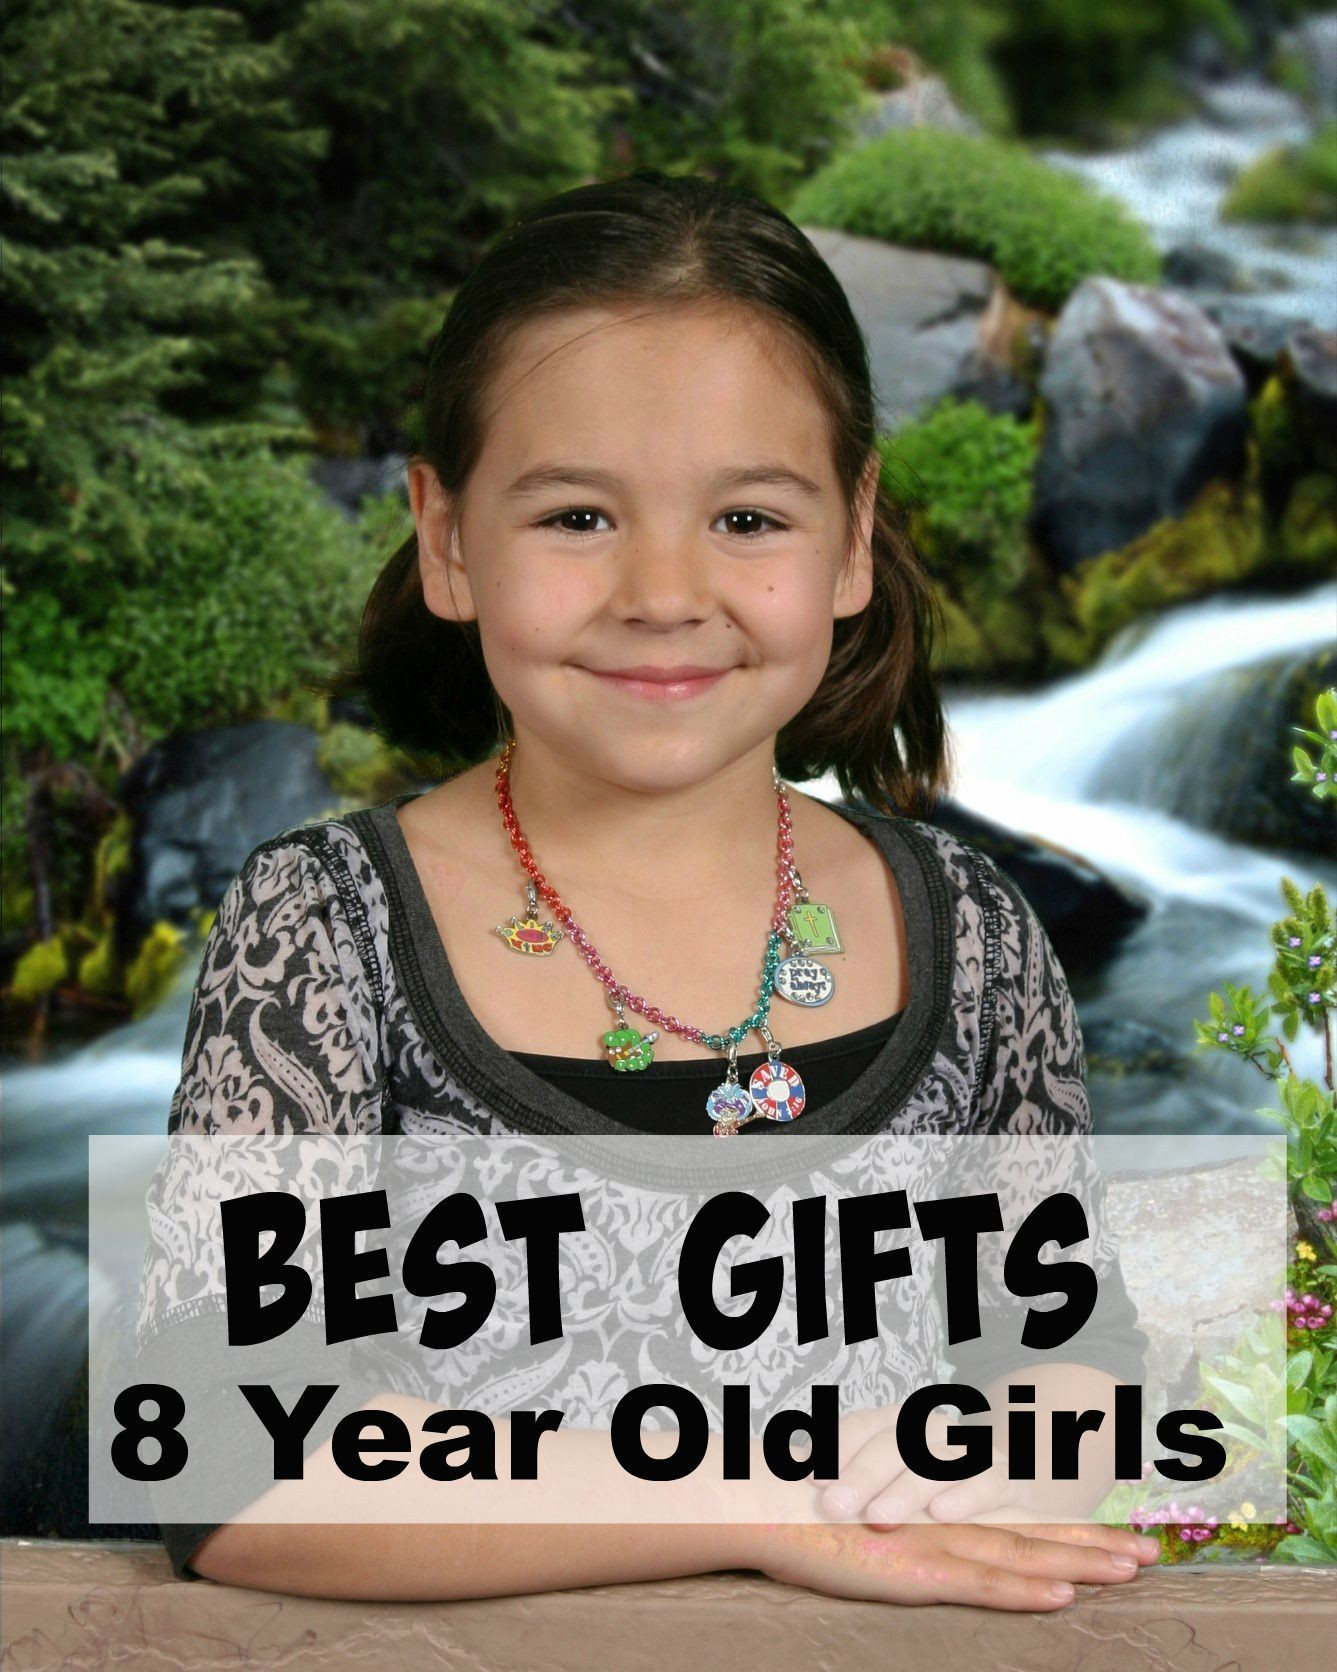 Birthday Gifts For 8 Year Old Girl
 25 Spectacular Gift Ideas For 8 Year Old Girls That WILL